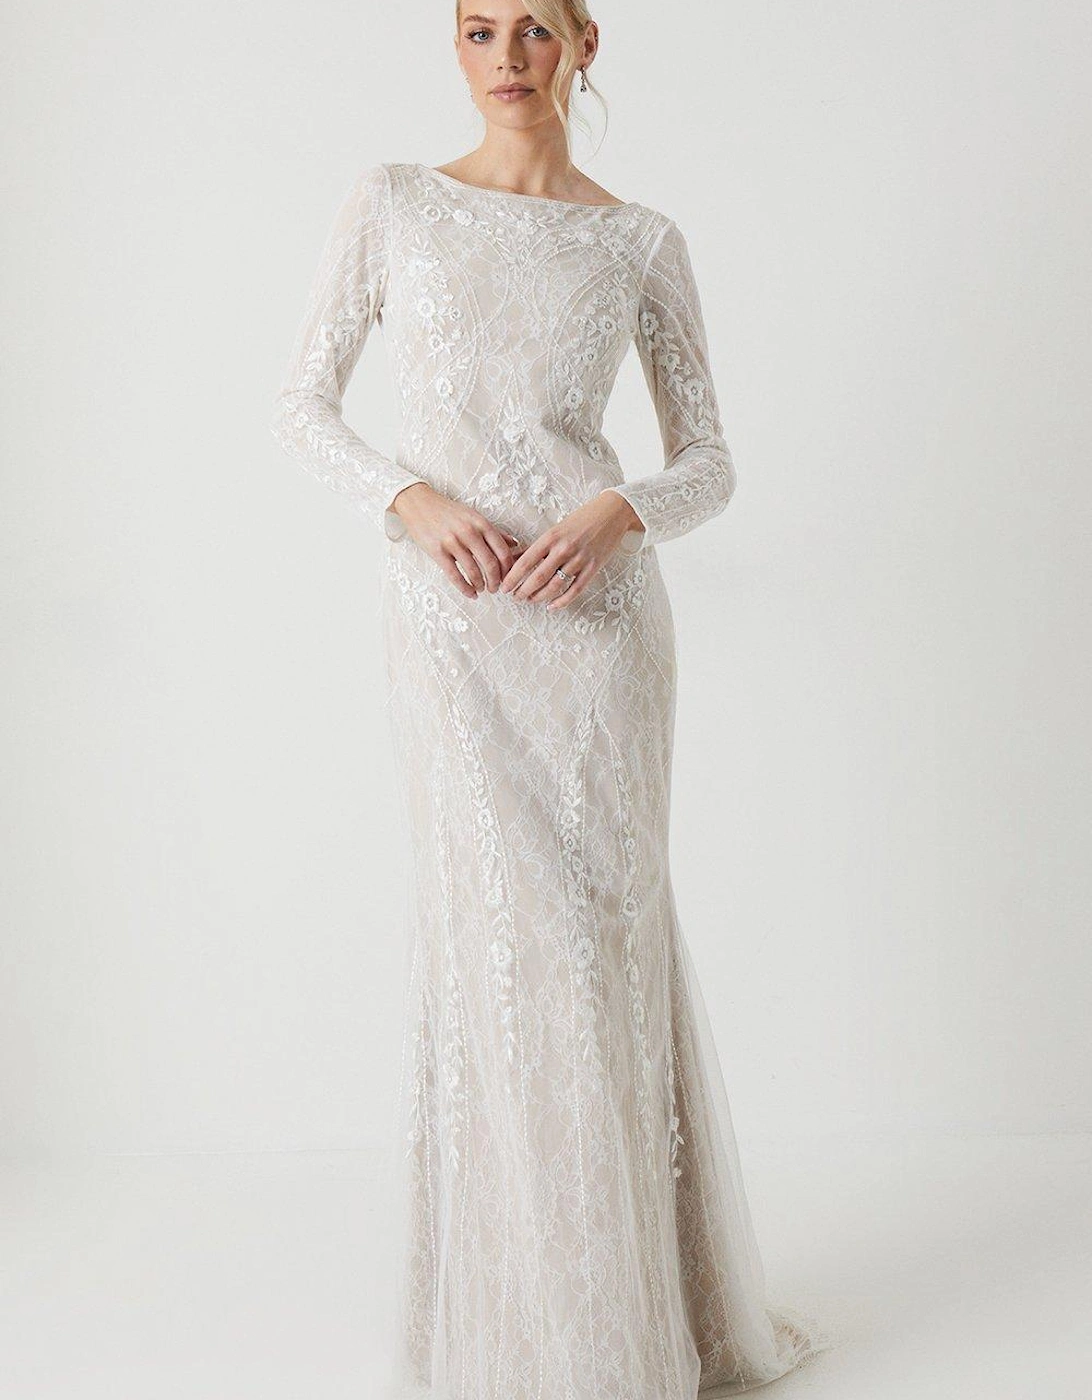 Premium Lace Overlay Handstitched Long Sleeve Wedding Dress, 6 of 5